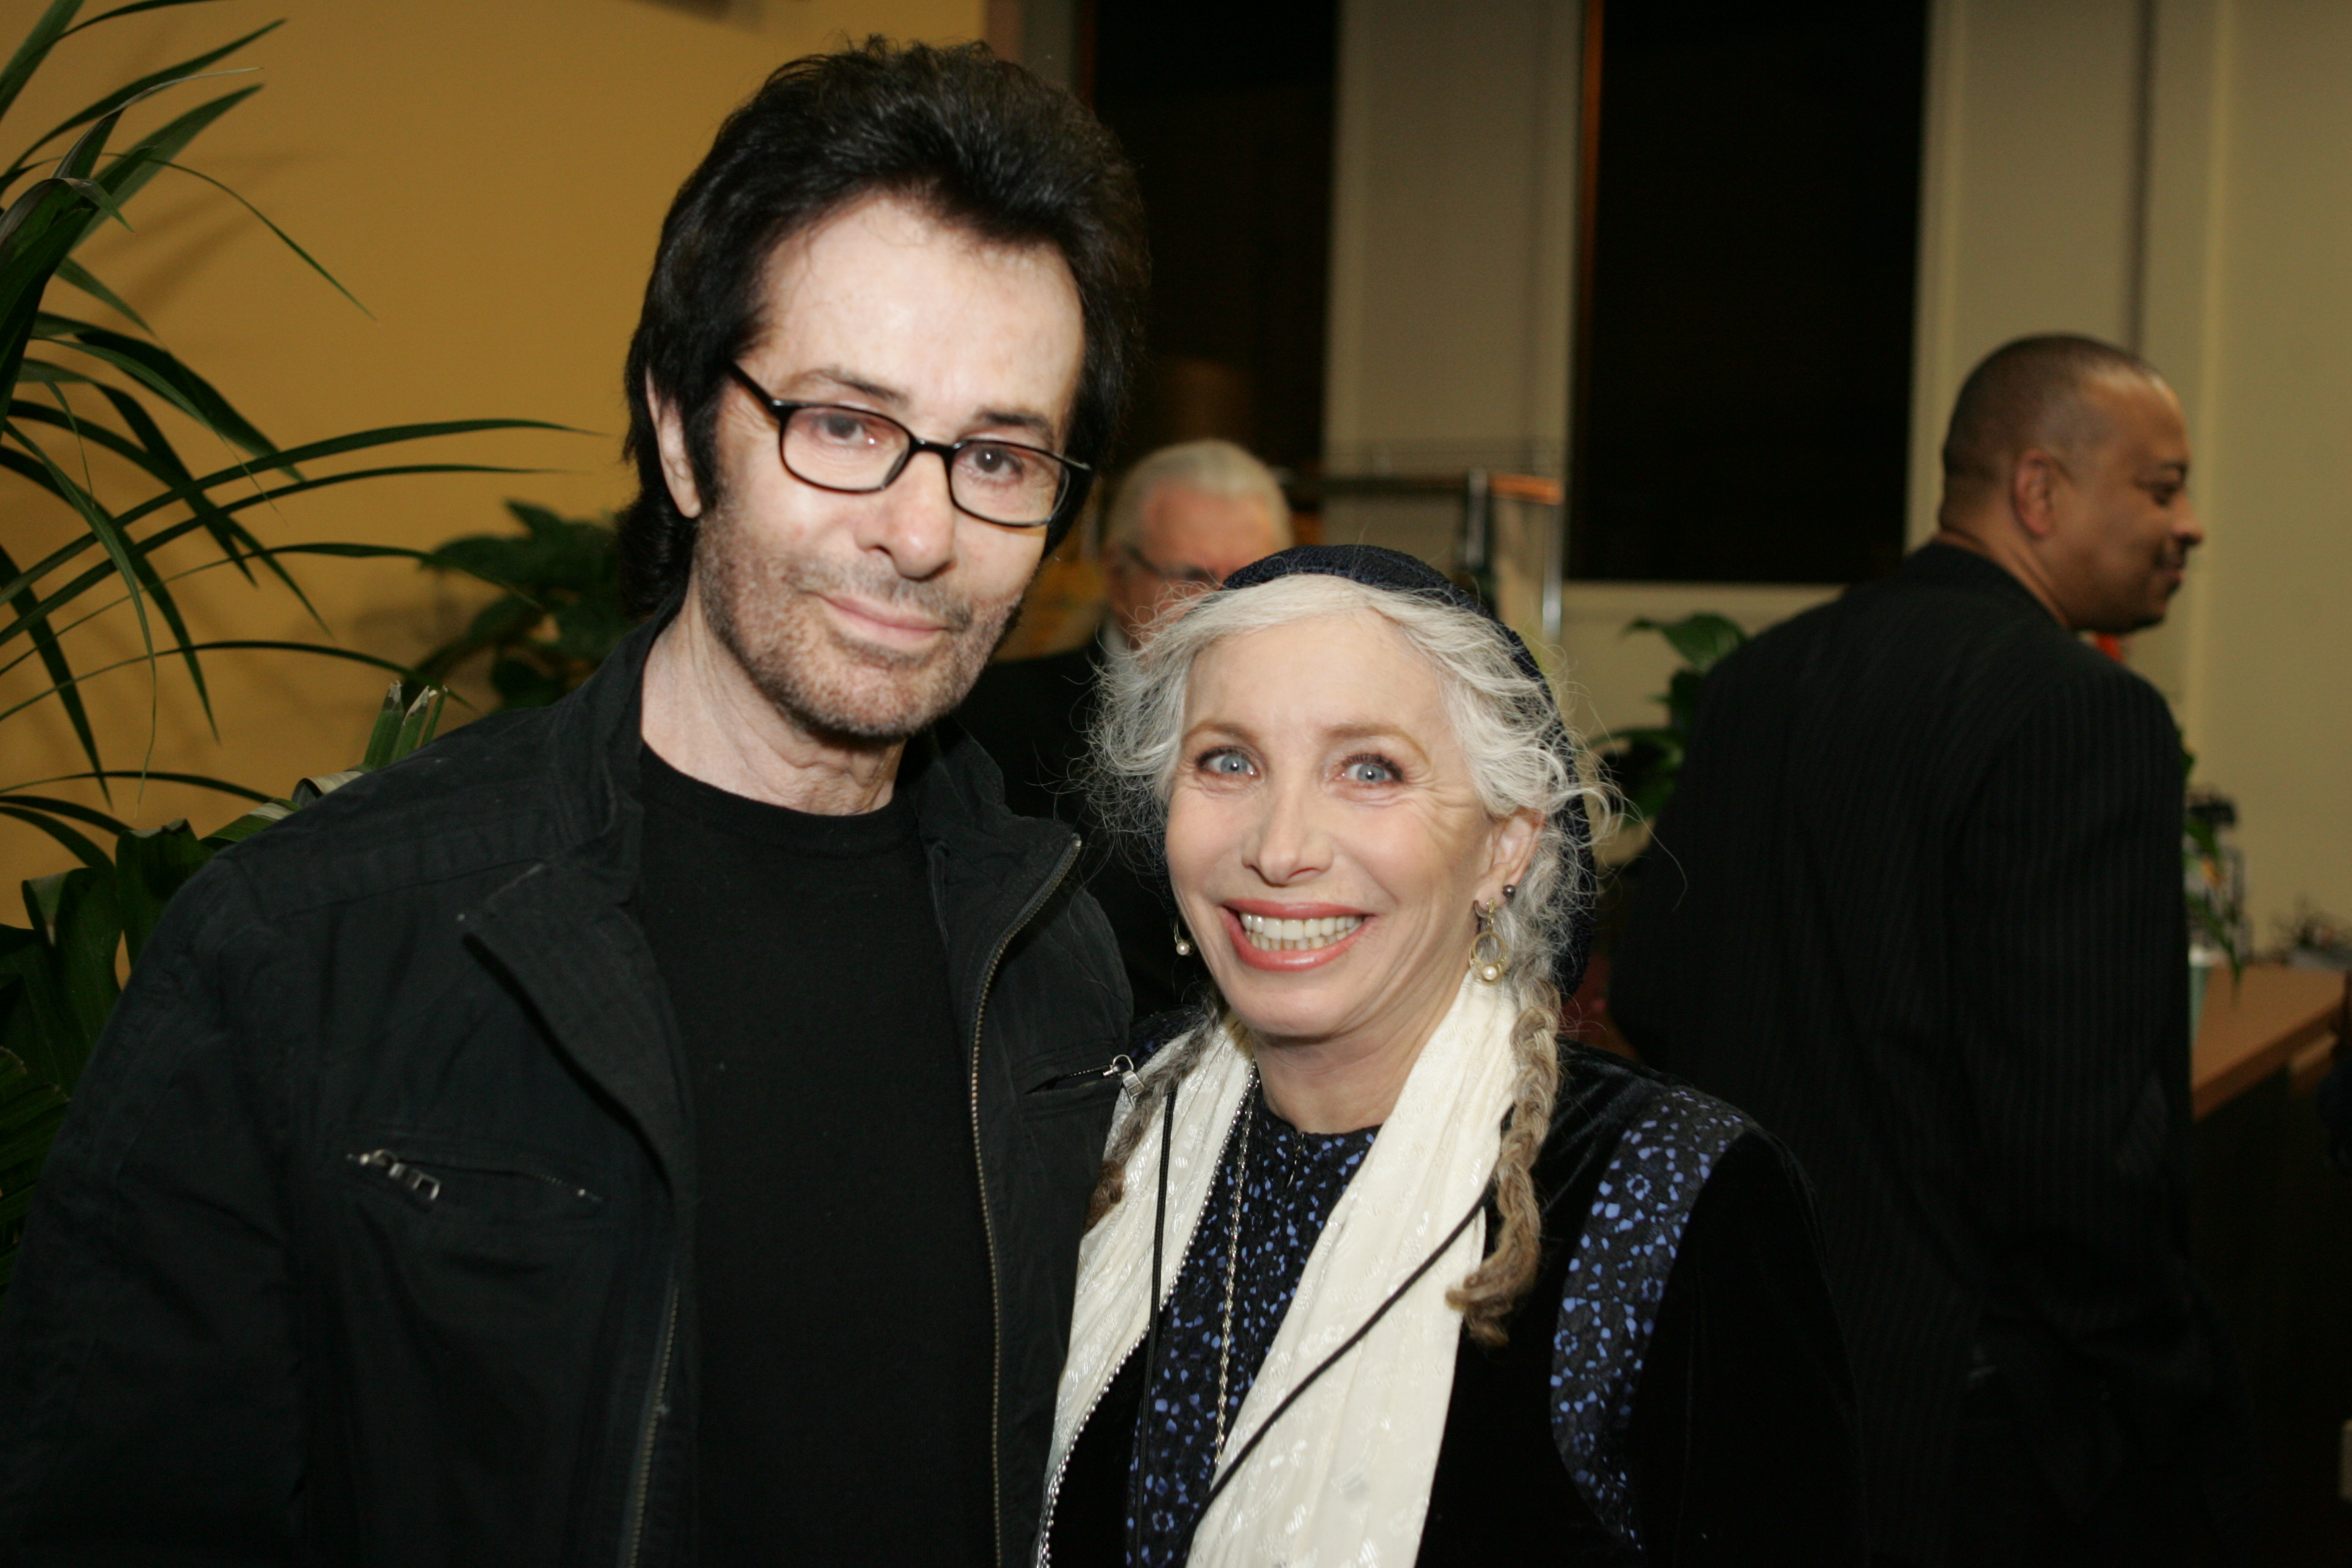 George Chakiris and Pepper Jay at Kat Kramer's Films that Changed the World.